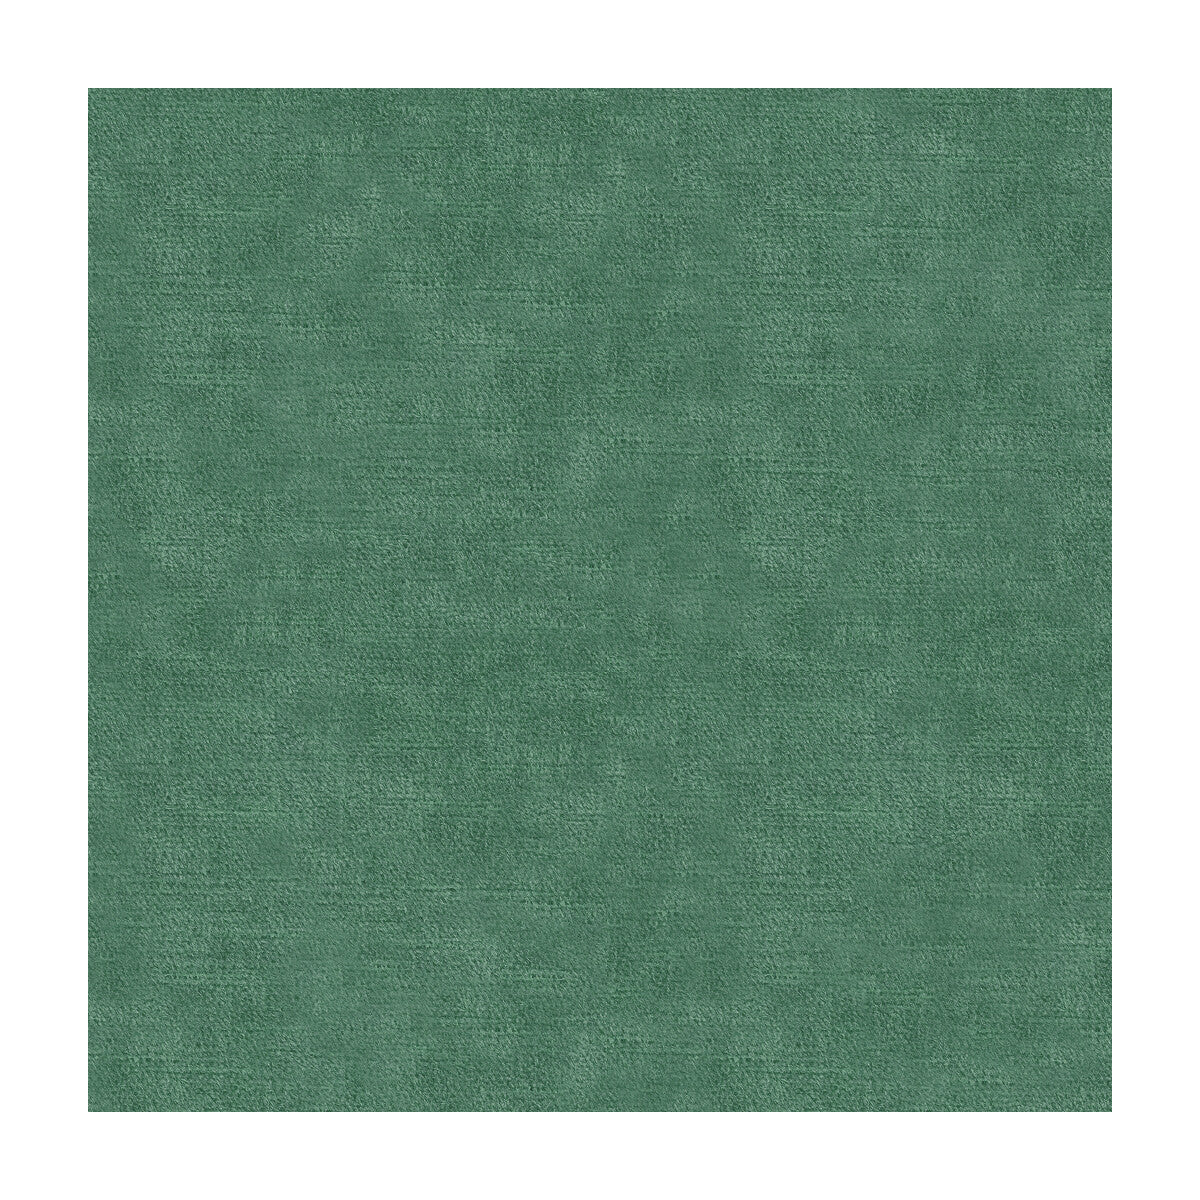 Montage fabric in jade color - pattern GWF-3526.30.0 - by Lee Jofa Modern in the Kelly Wearstler III collection